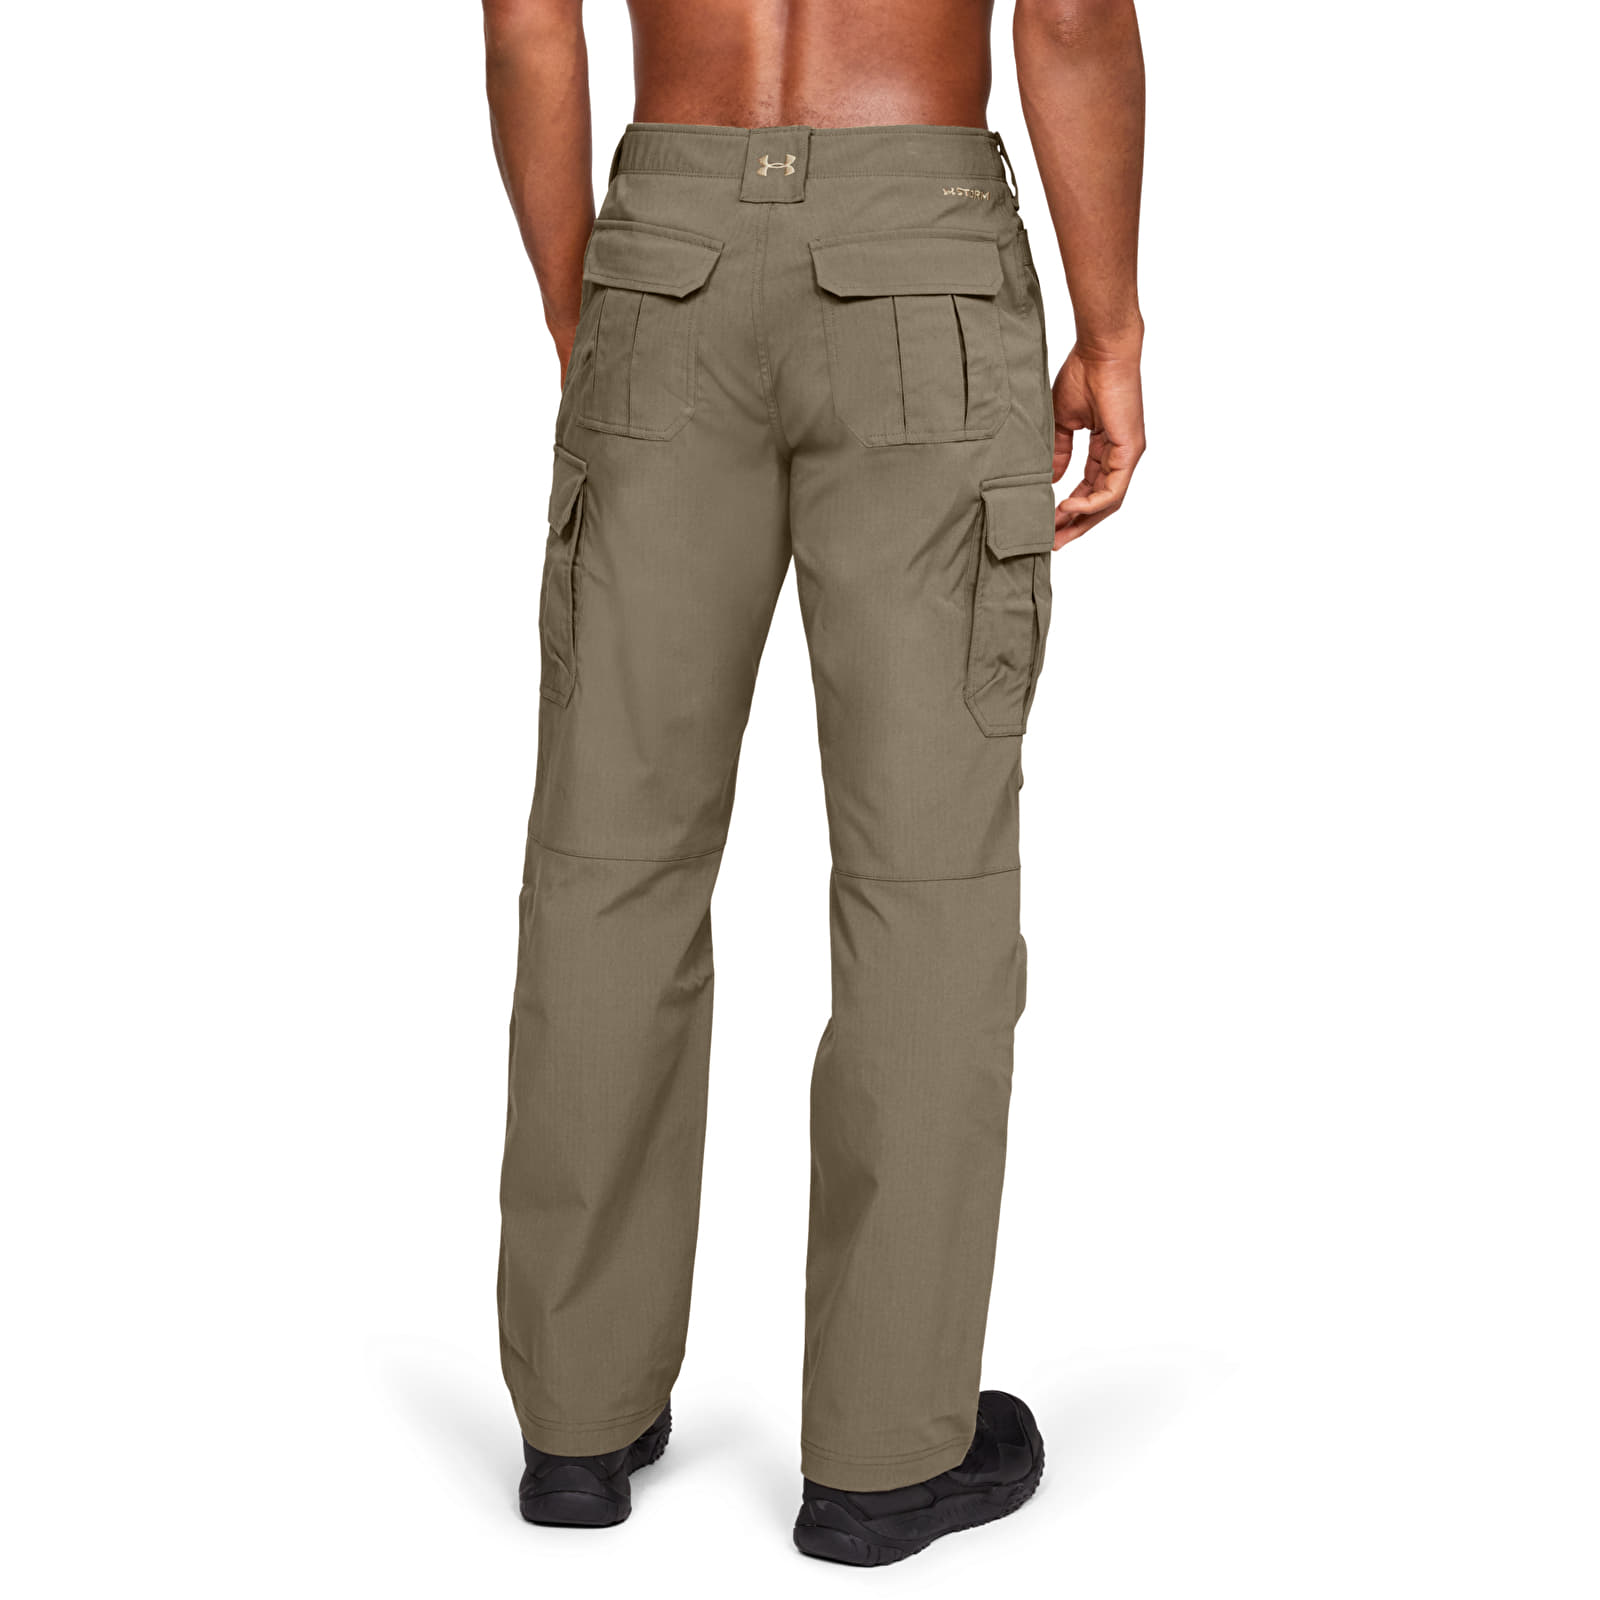 Pants and jeans Under Armour Tac Patrol Pant Ii Brown